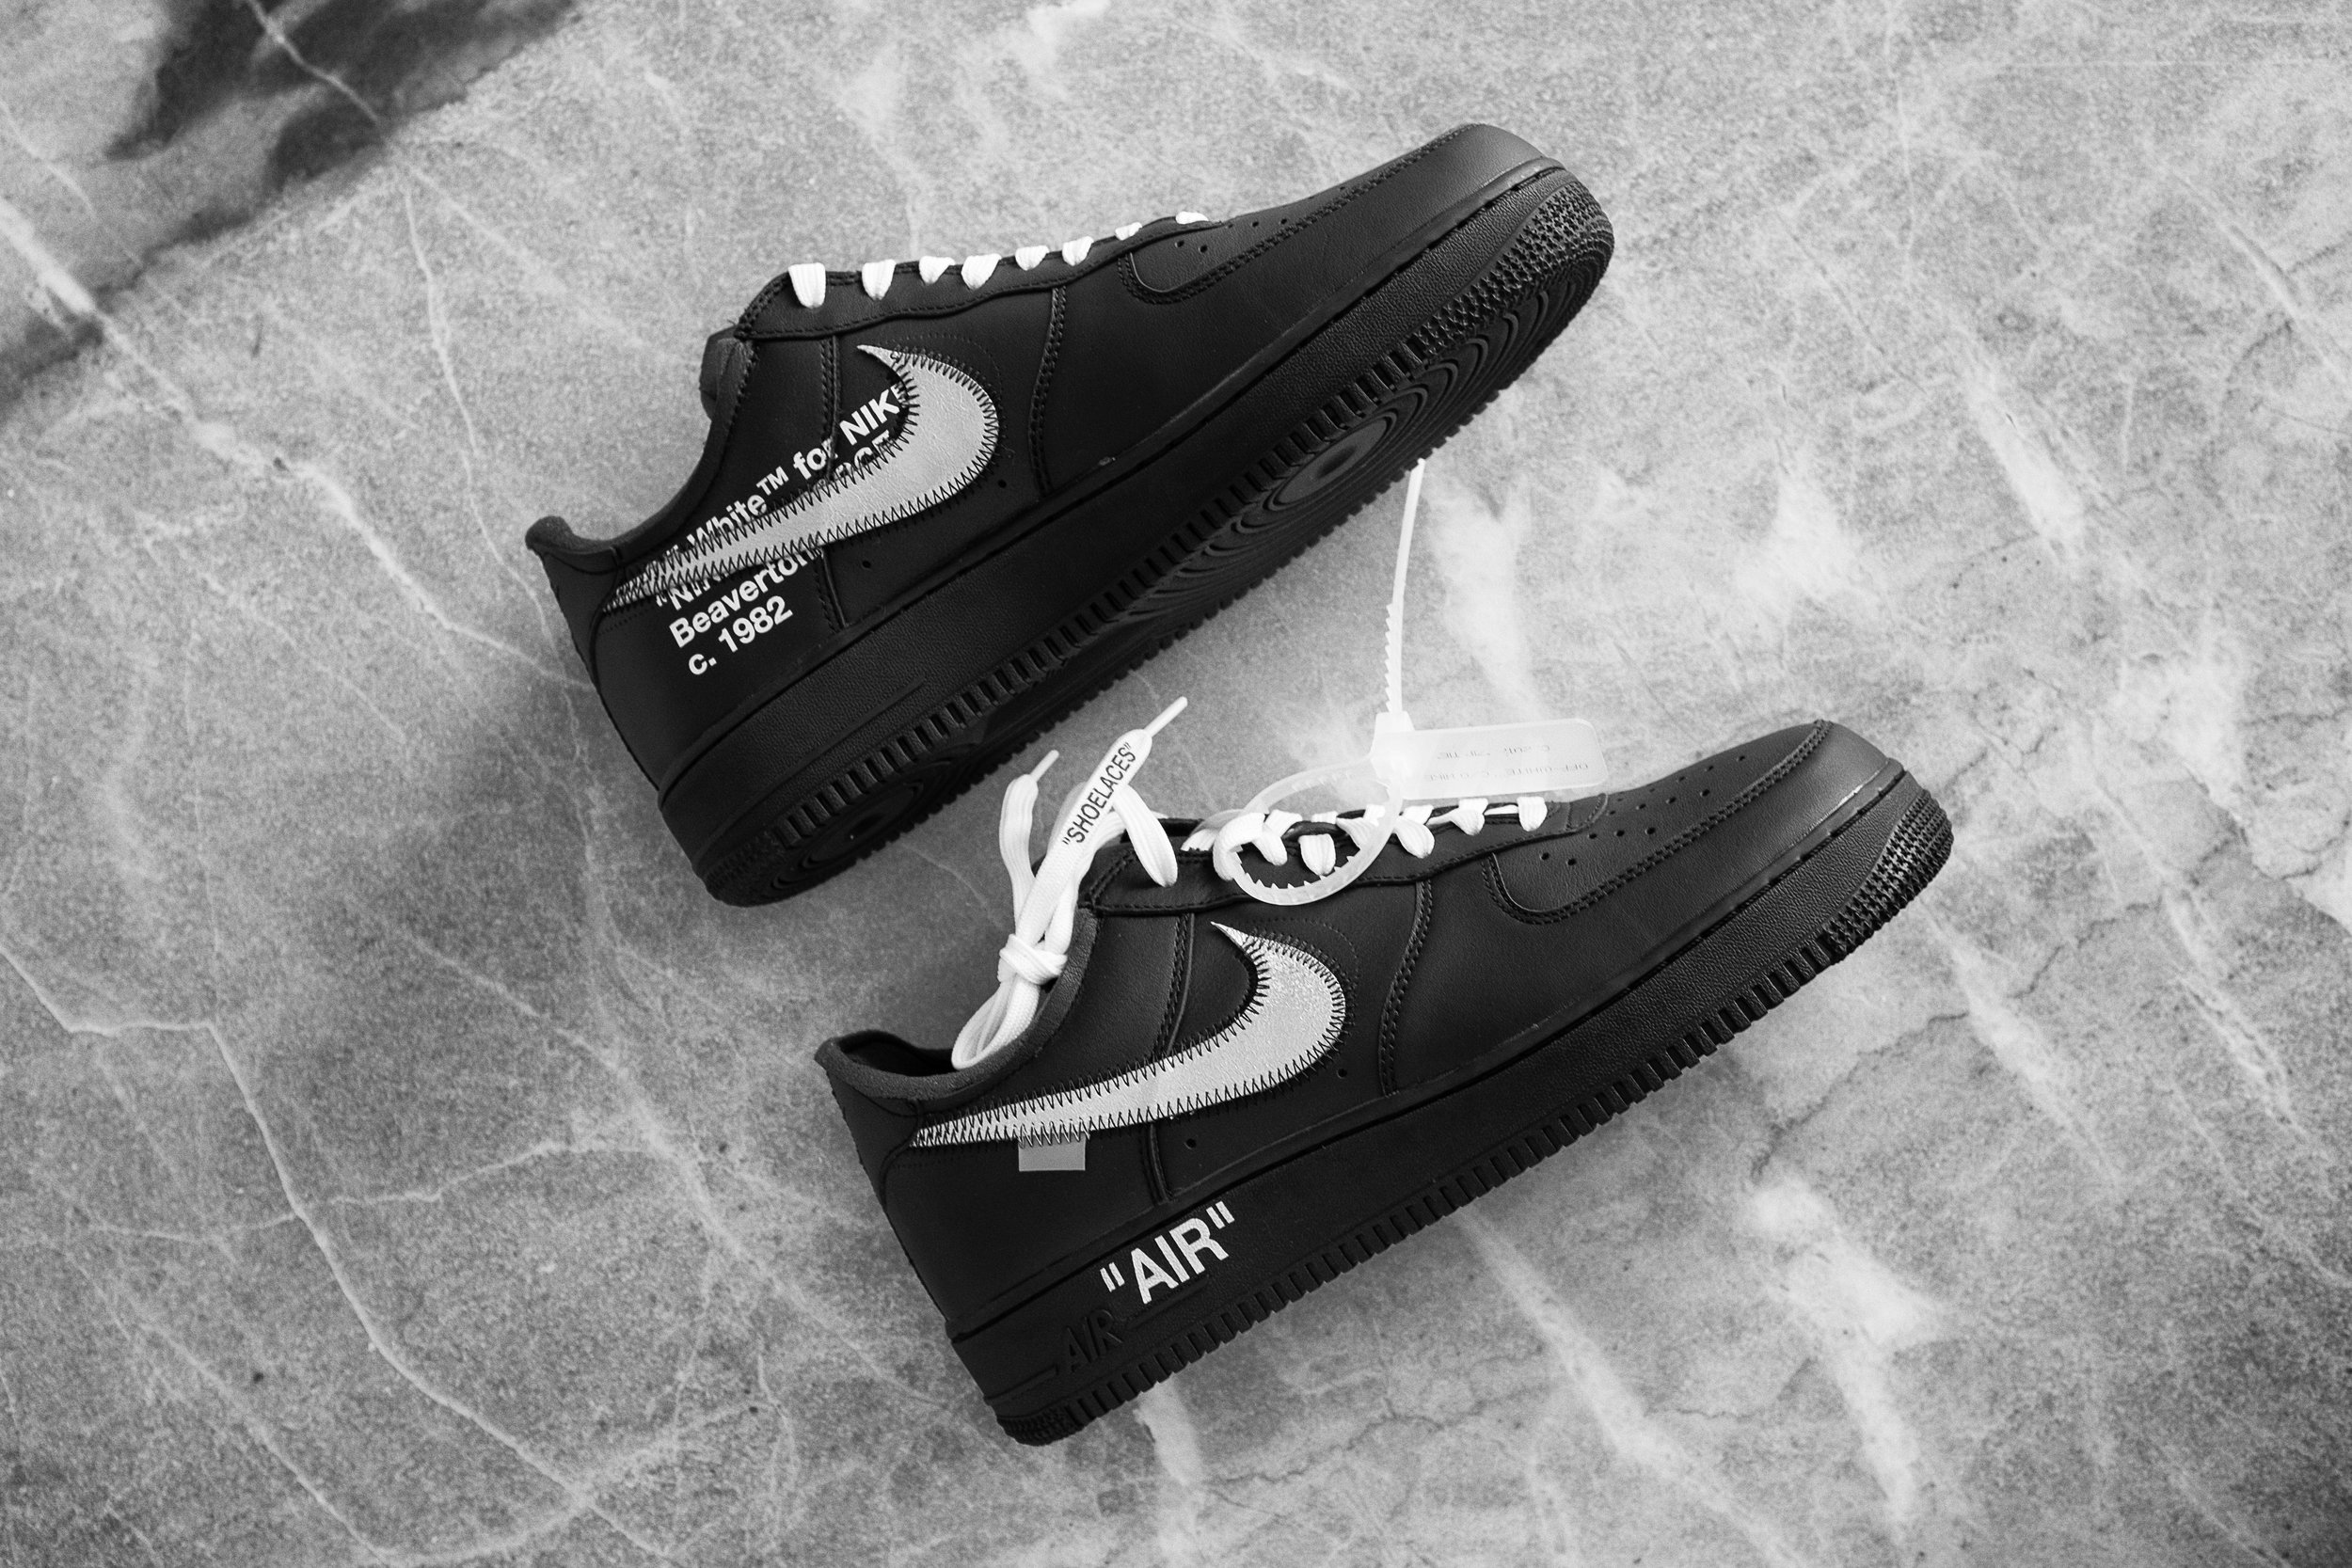 Nike x Off-White Air Force 1 MoMa  Nike shoes outfits, Black nike shoes,  Nike shoes air max